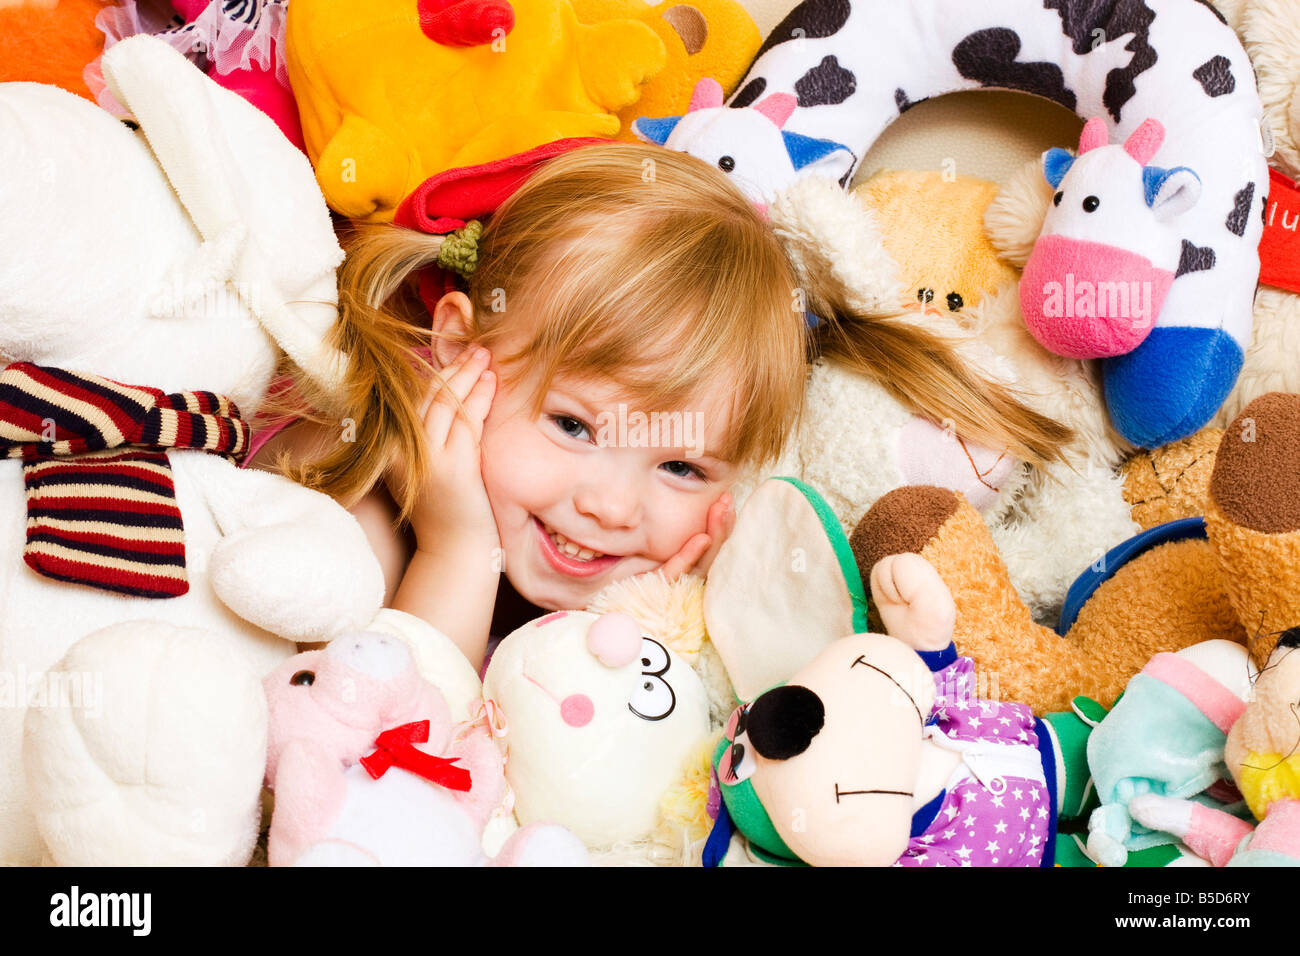 Smiling blond little girl, 4 years, with plushy animals Stock Photo